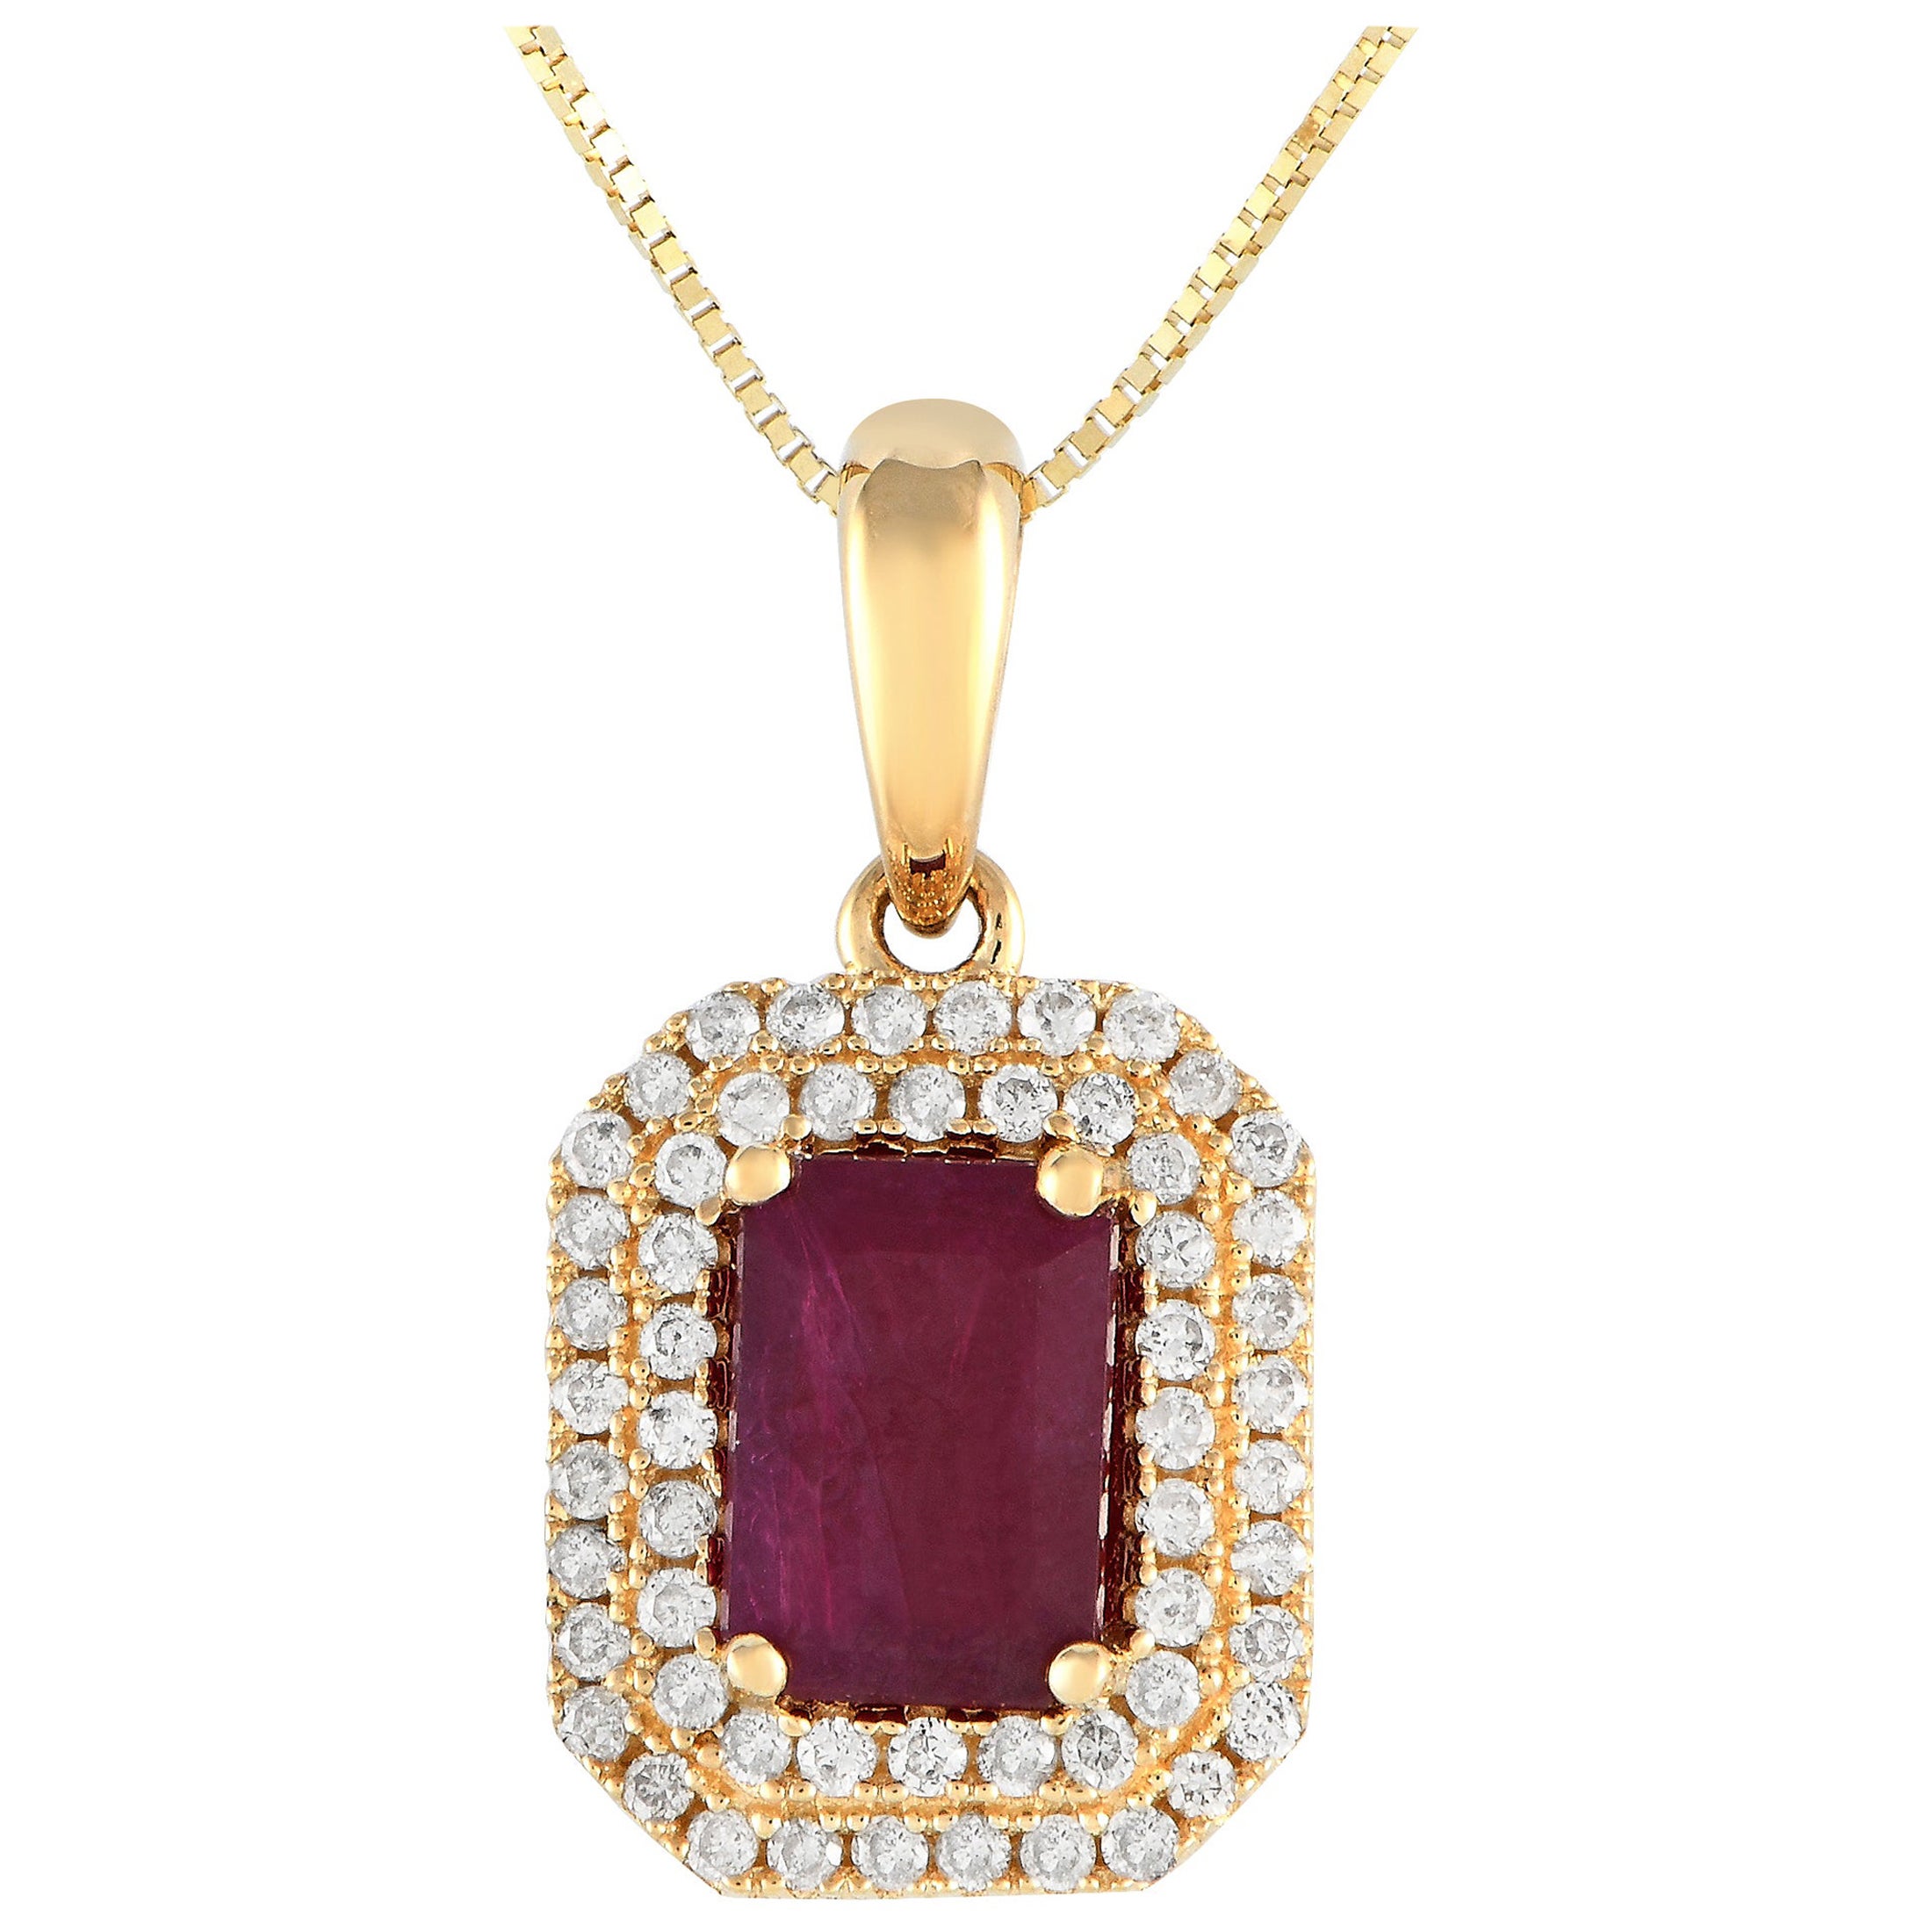 LB Exclusive 14K Yellow Gold 0.24ct Diamond & Ruby Pendant Necklace PD4-15905YRU For Sale